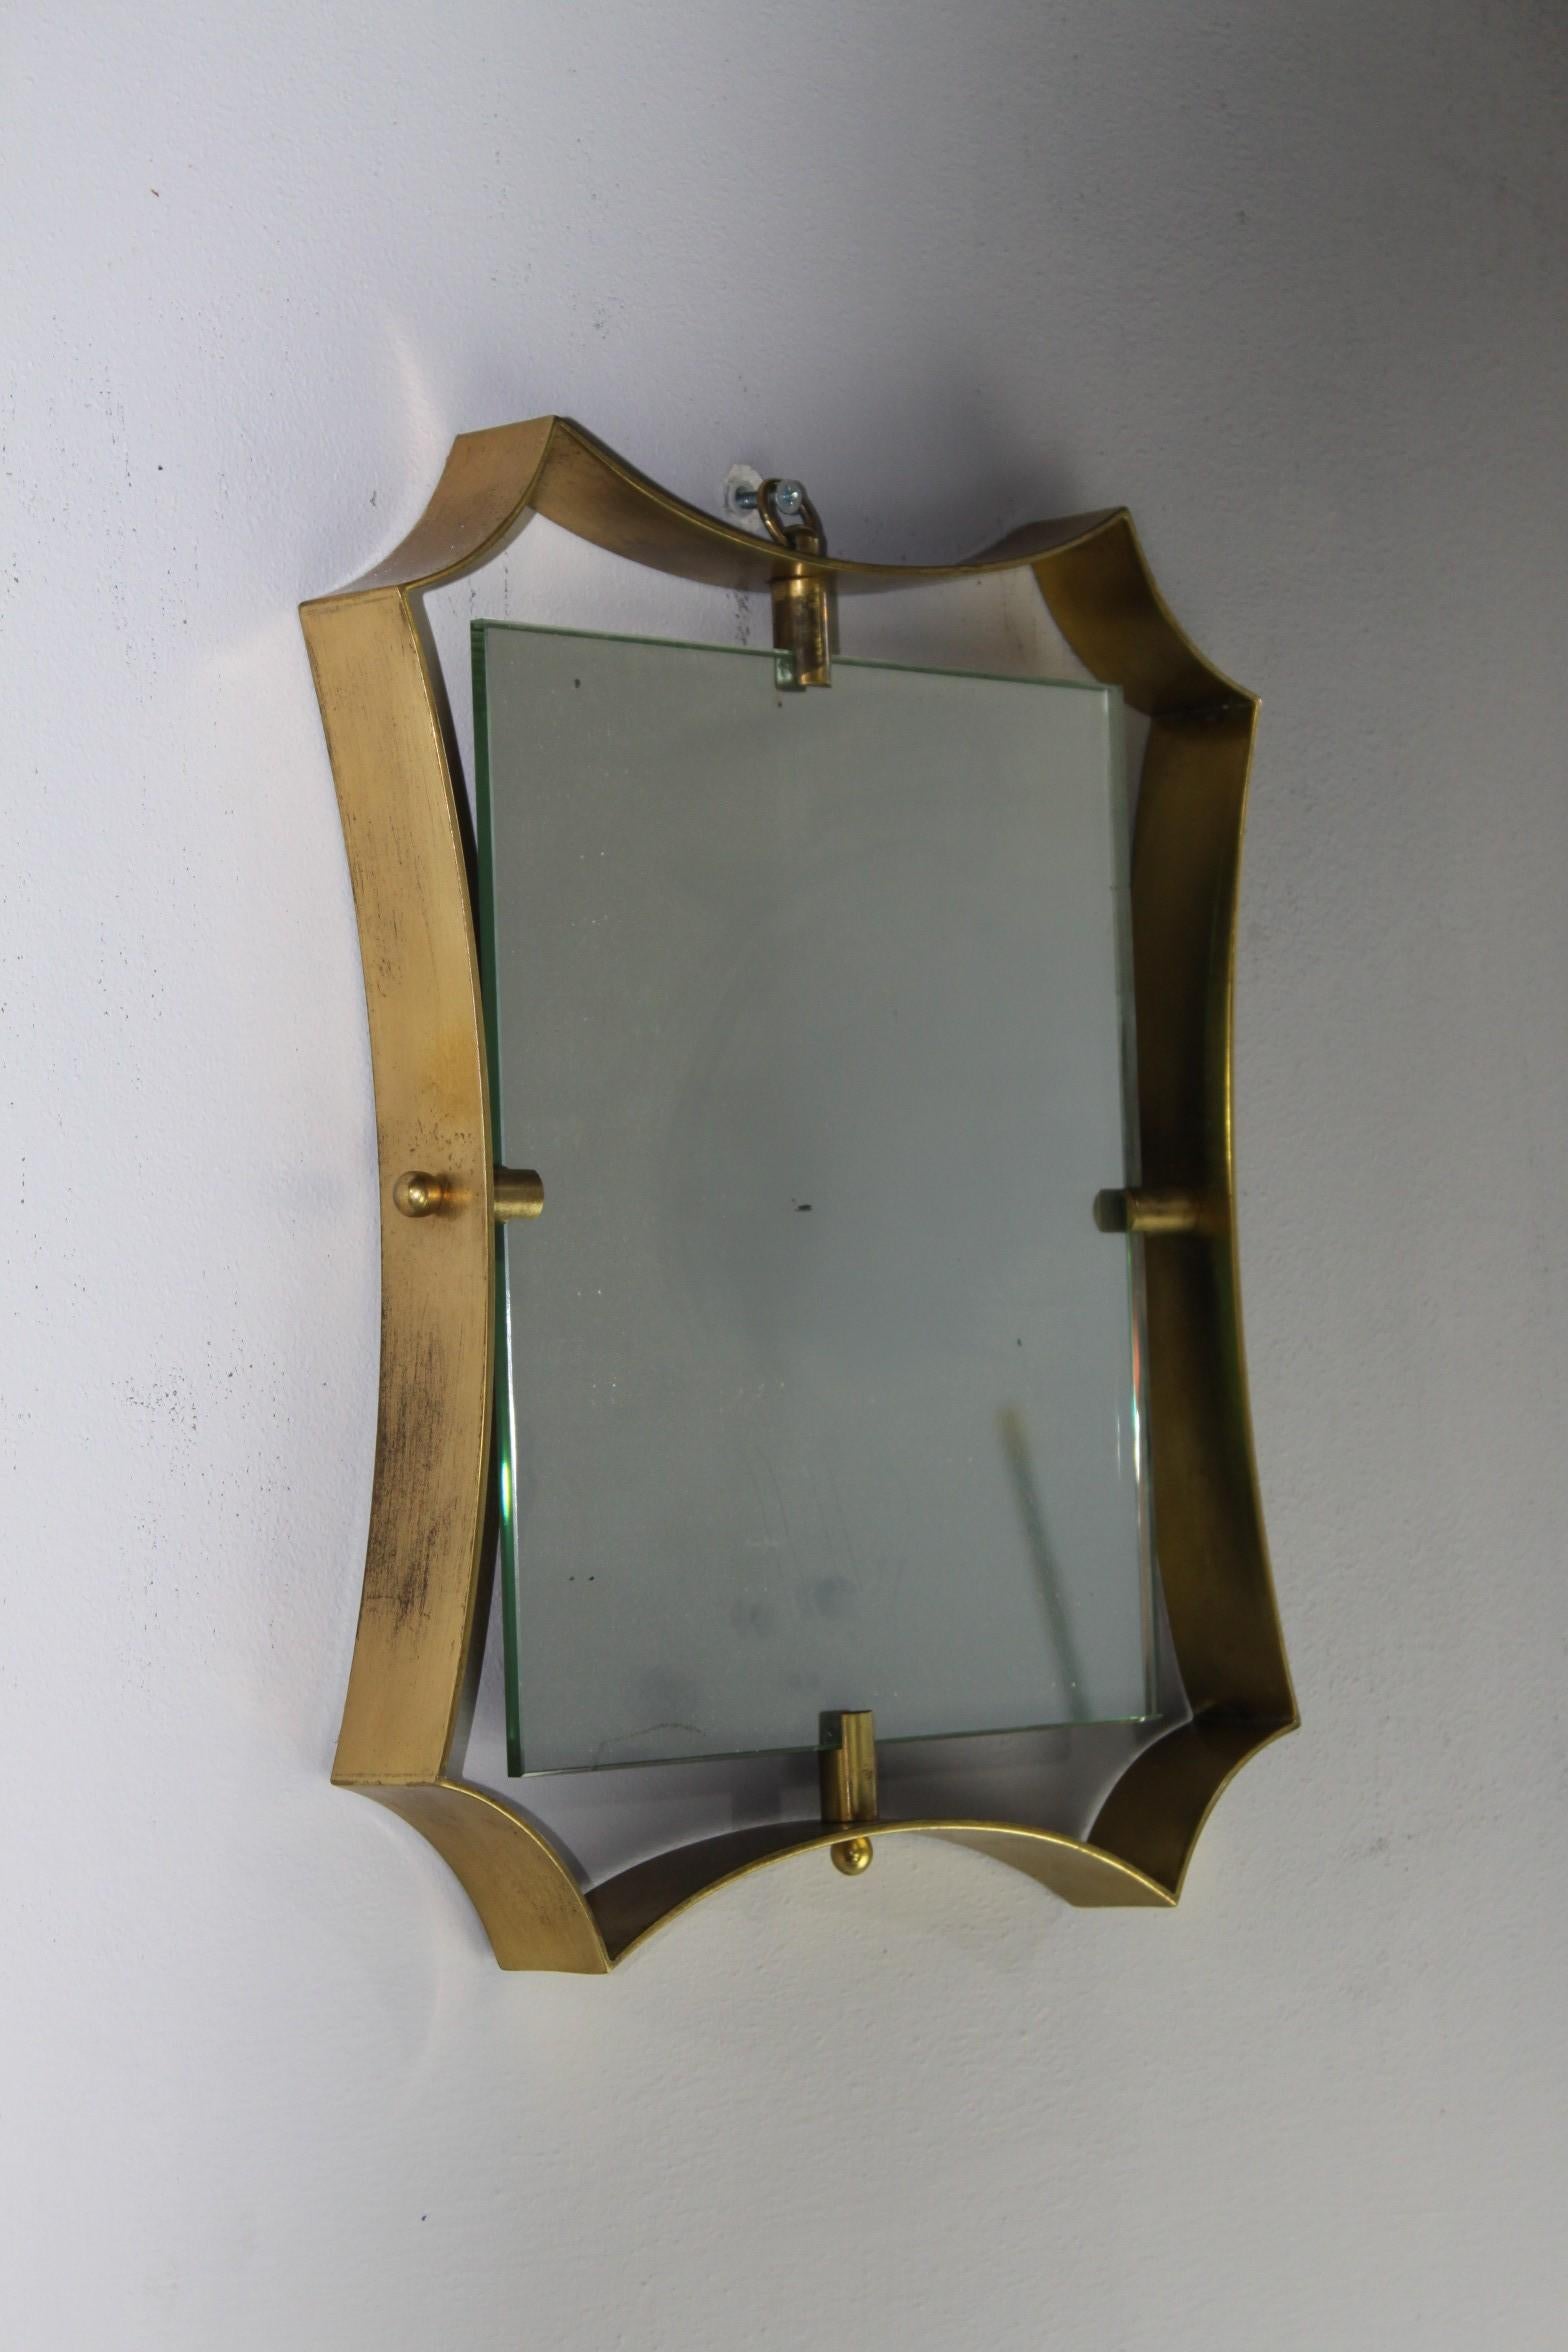 This stunning pair of Italian mirrors in brass from the 1950s offers a truly one-of-a-kind design with an incredible patina. These mirrors are an incredible find, and anyone looking for a unique piece to make a statement in their home should take